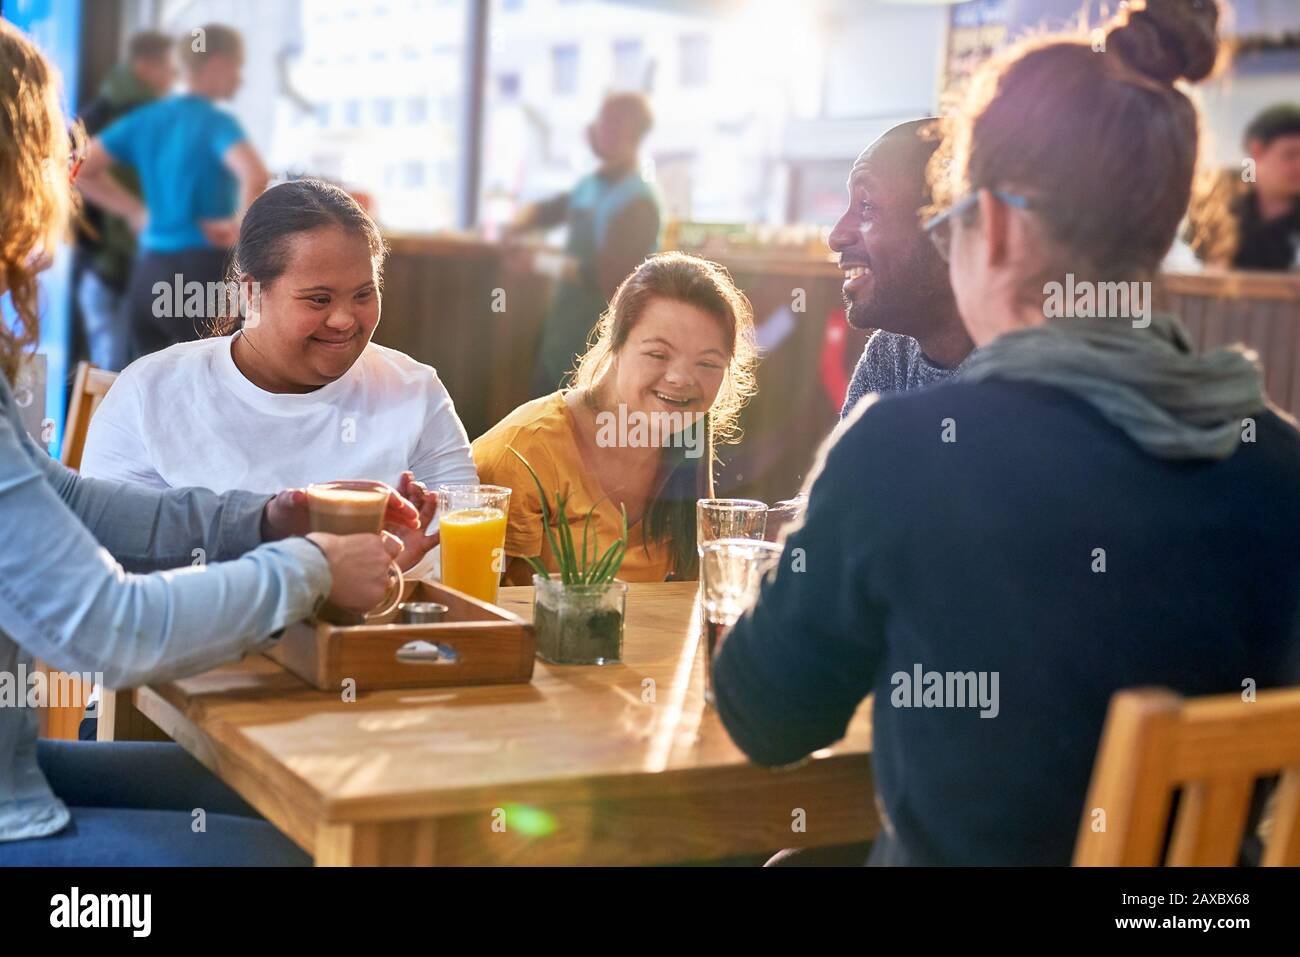 Happy young women with Down Syndrome laughing in cafe Stock Photo